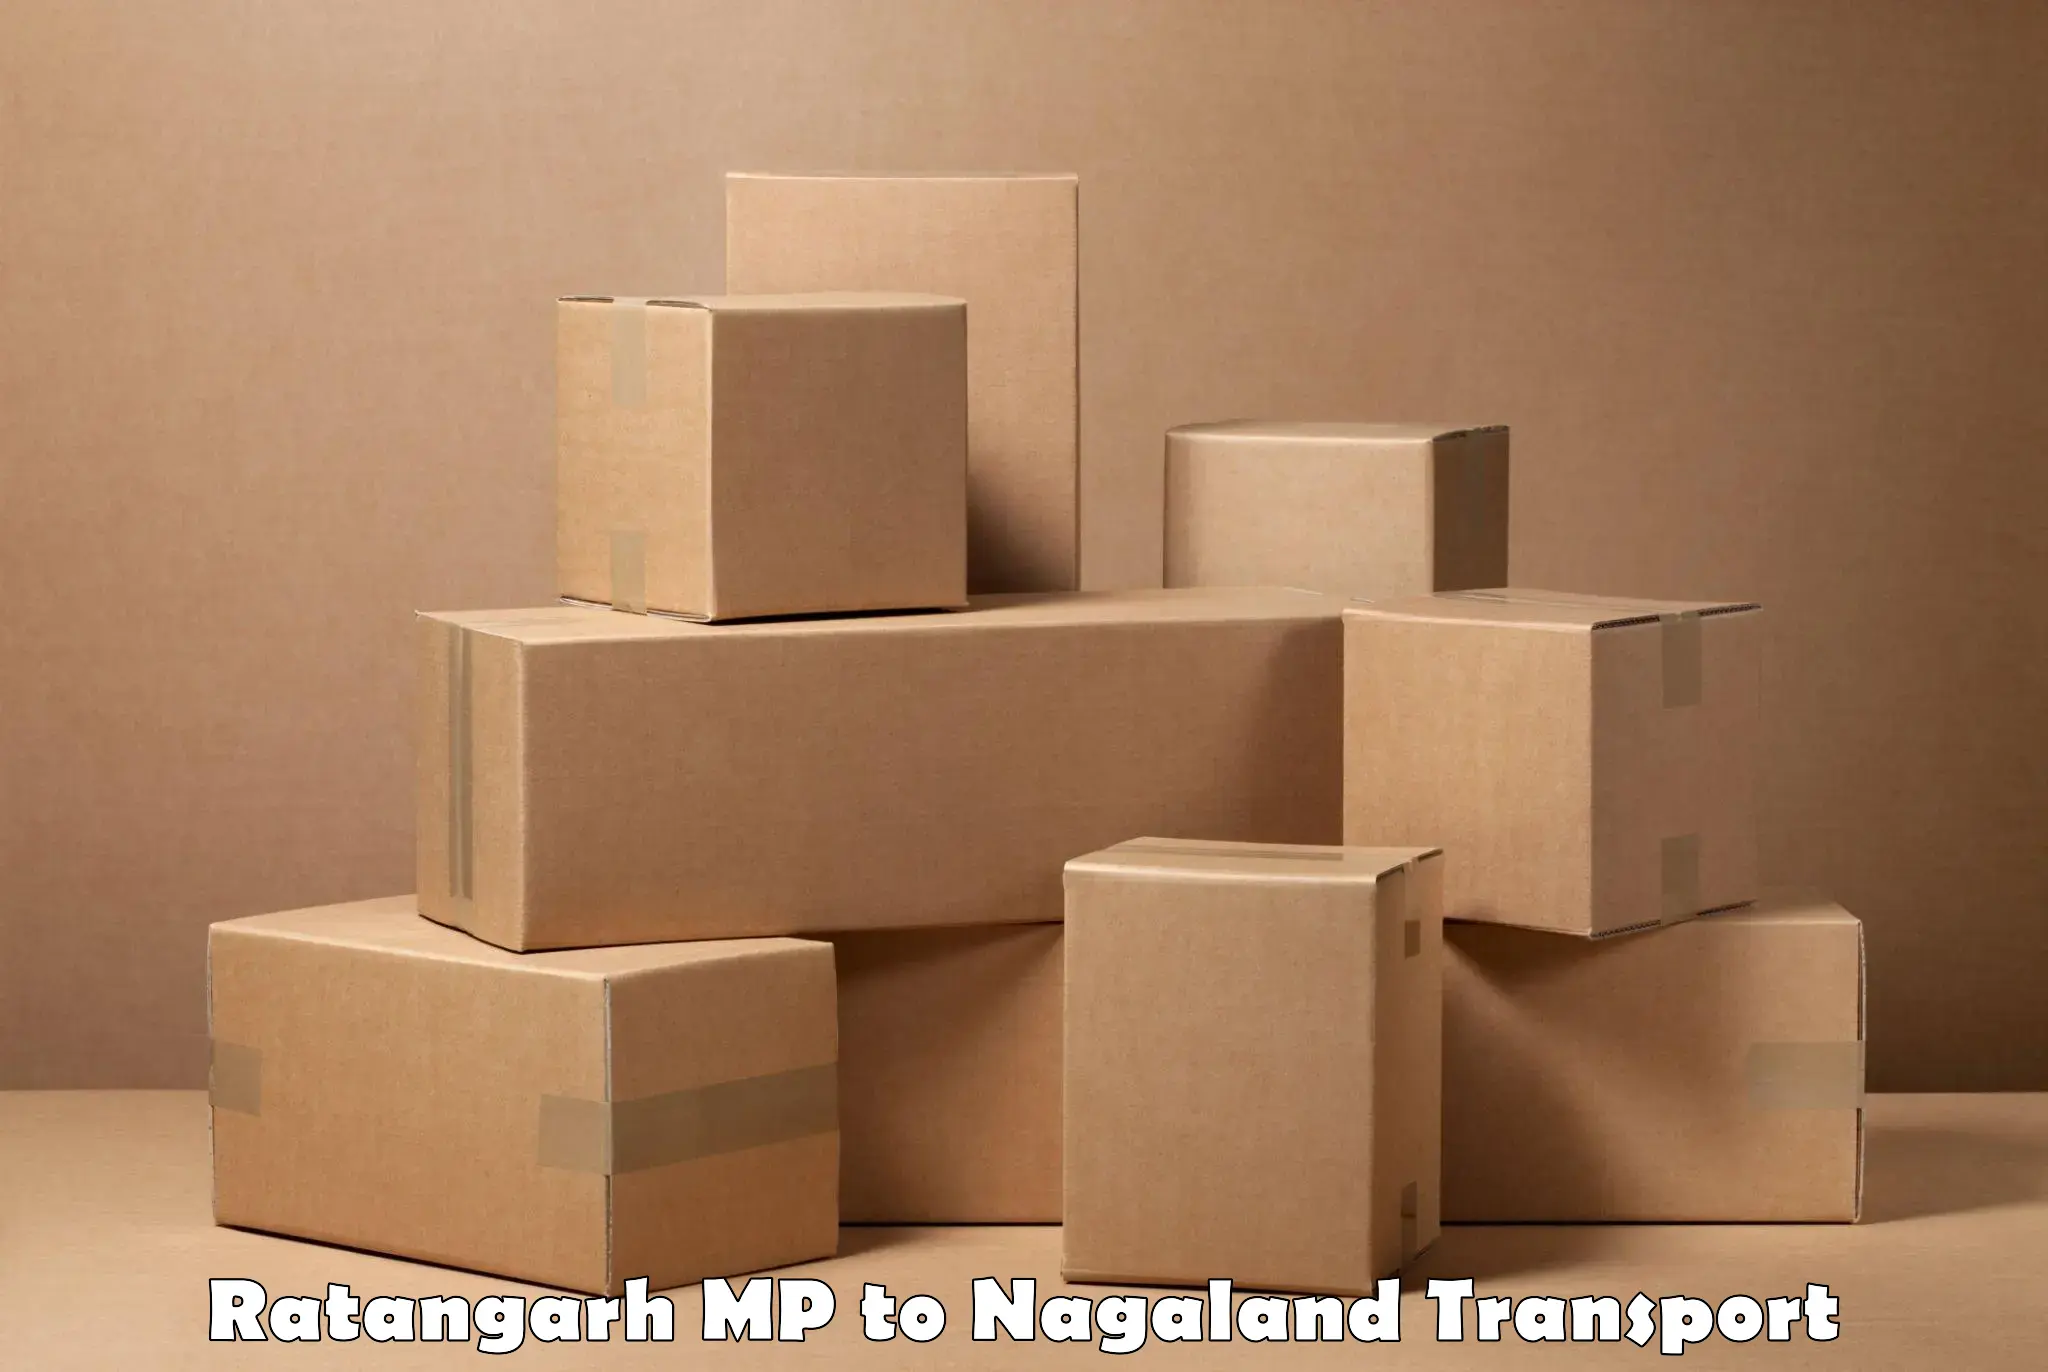 Express transport services Ratangarh MP to Mon